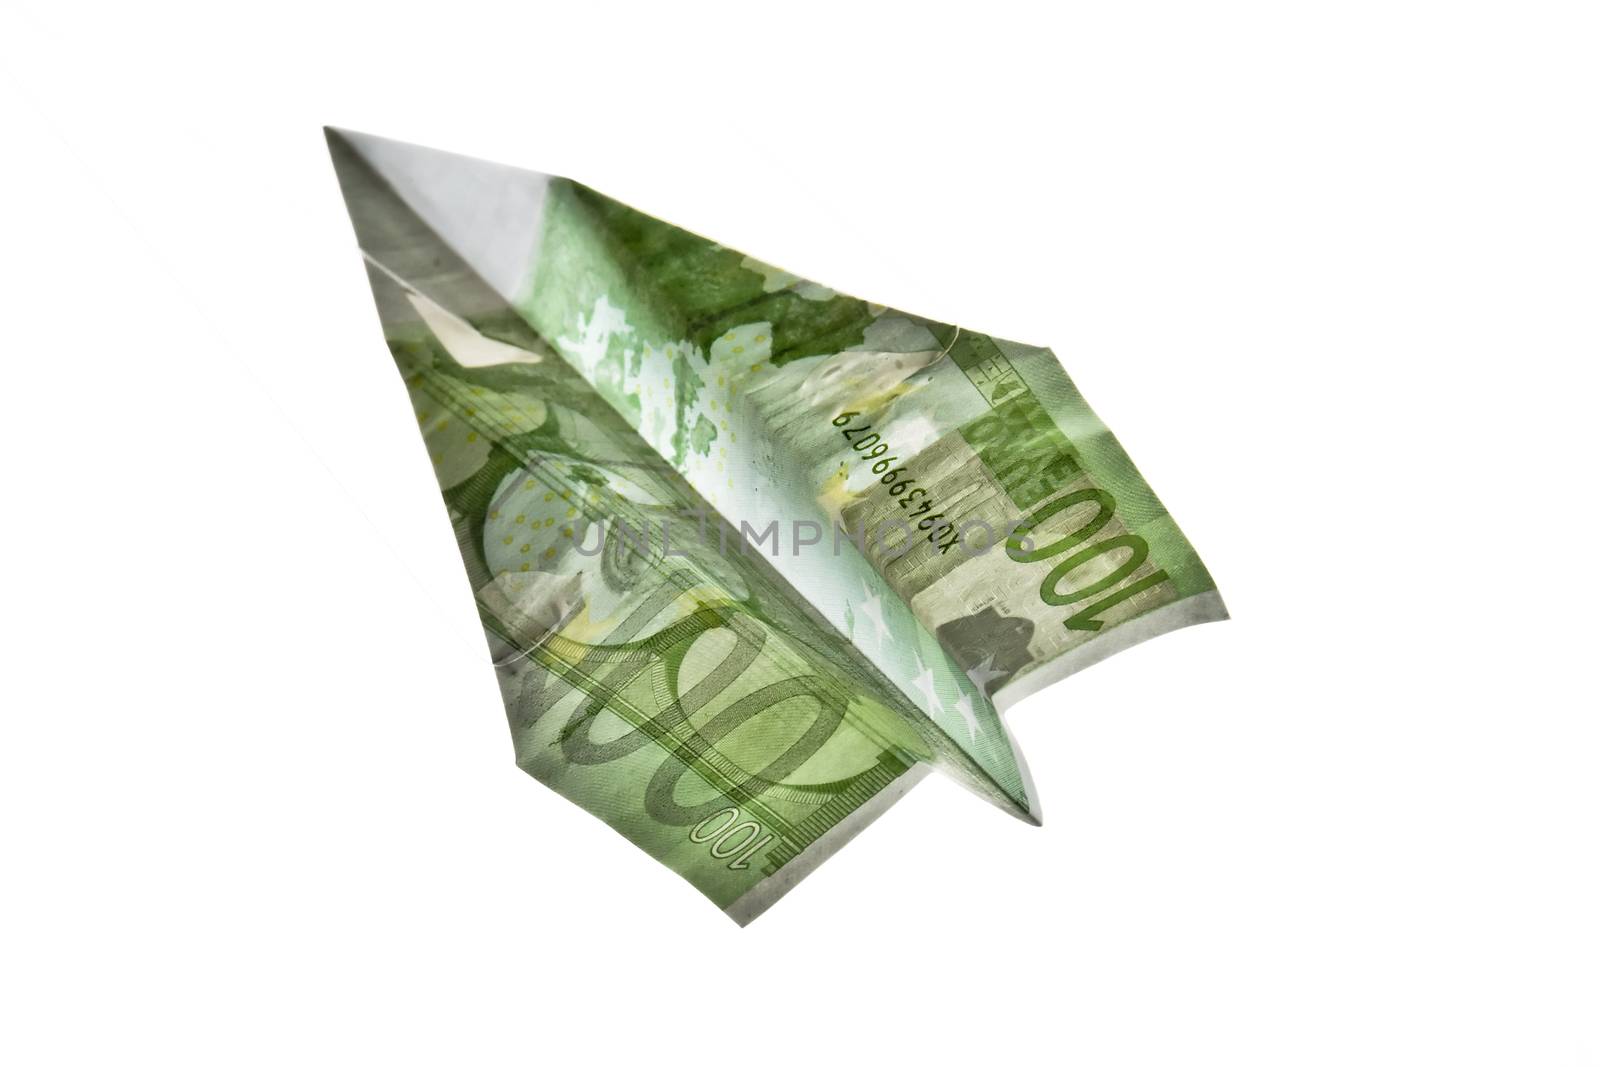 100 Euros  Banknote Paper Plane by ocusfocus